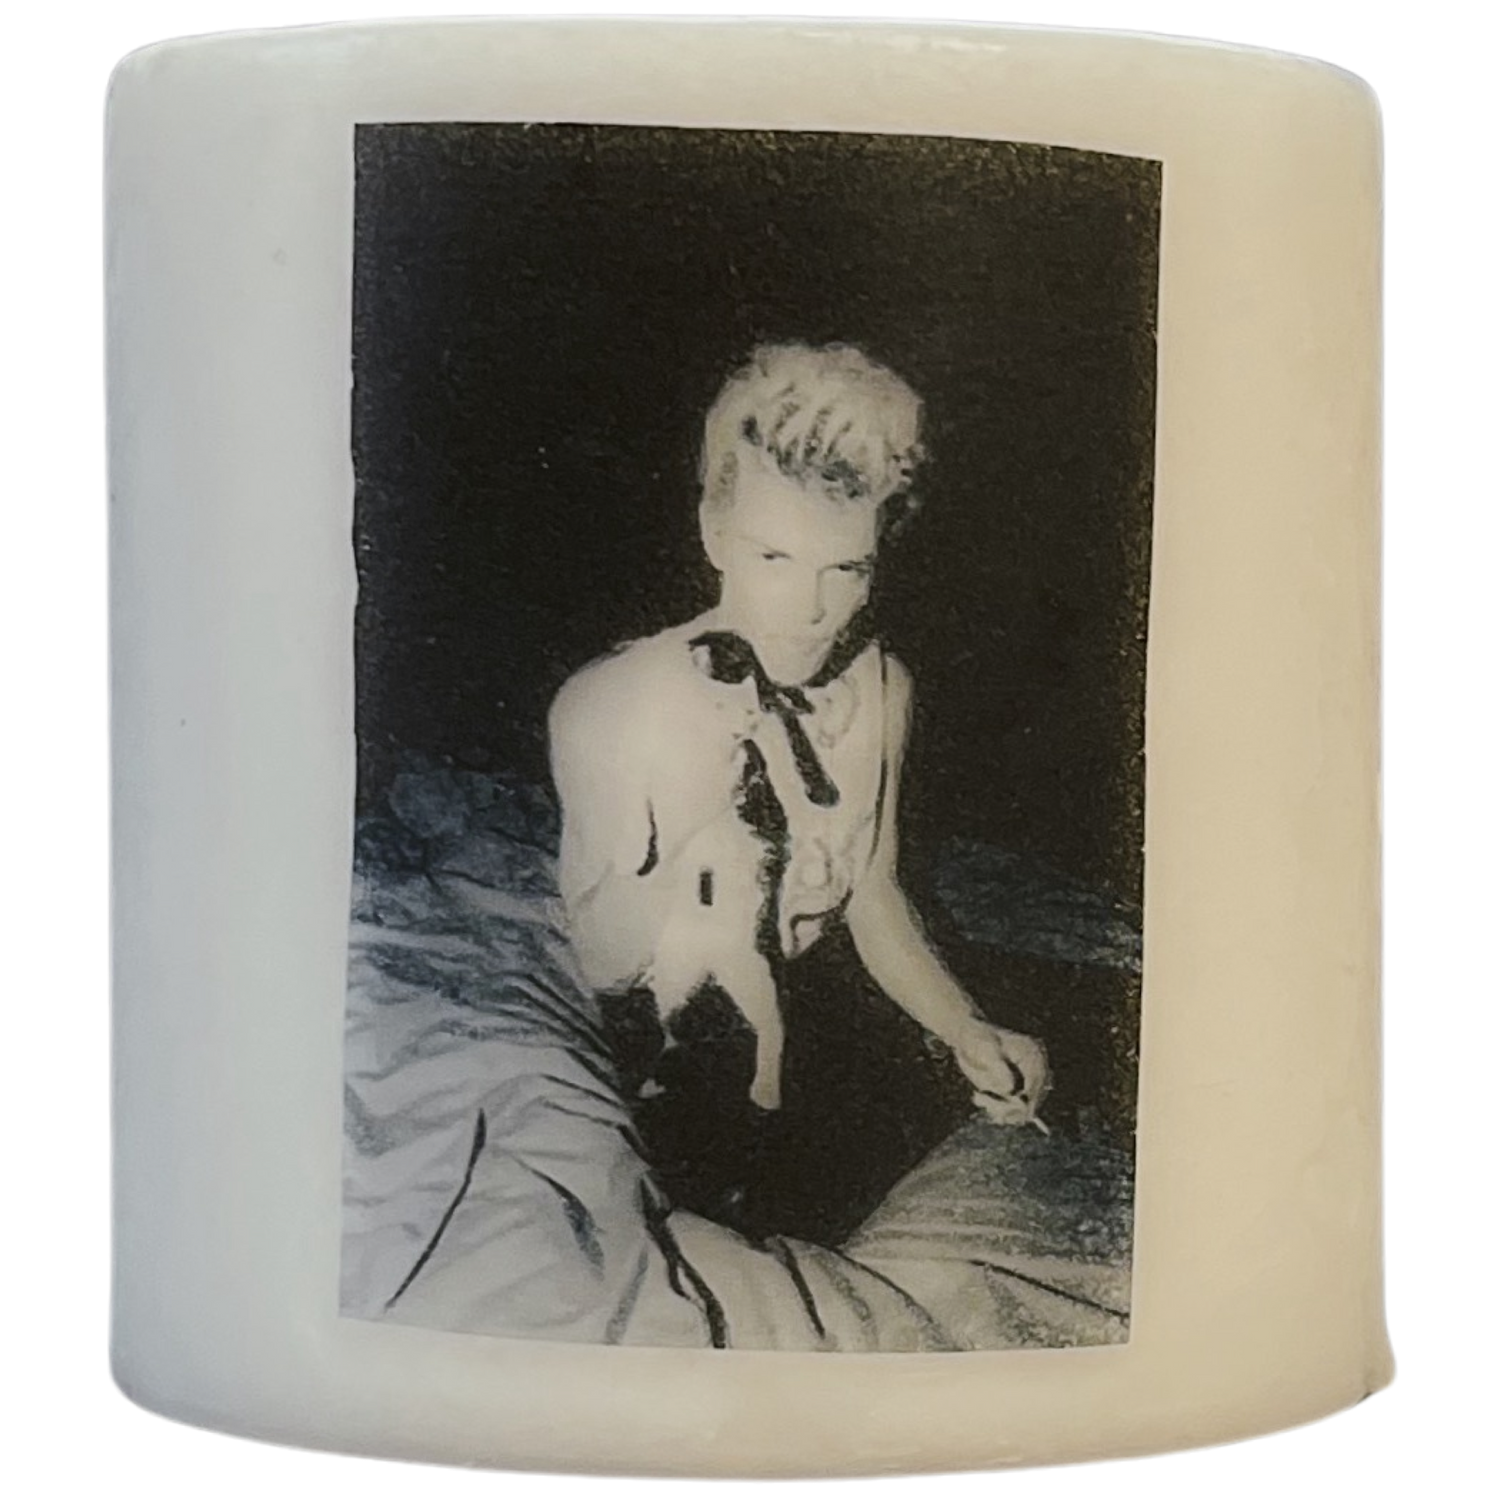 BILLY IDOL Collectors Candle - DRENCHEDskin®